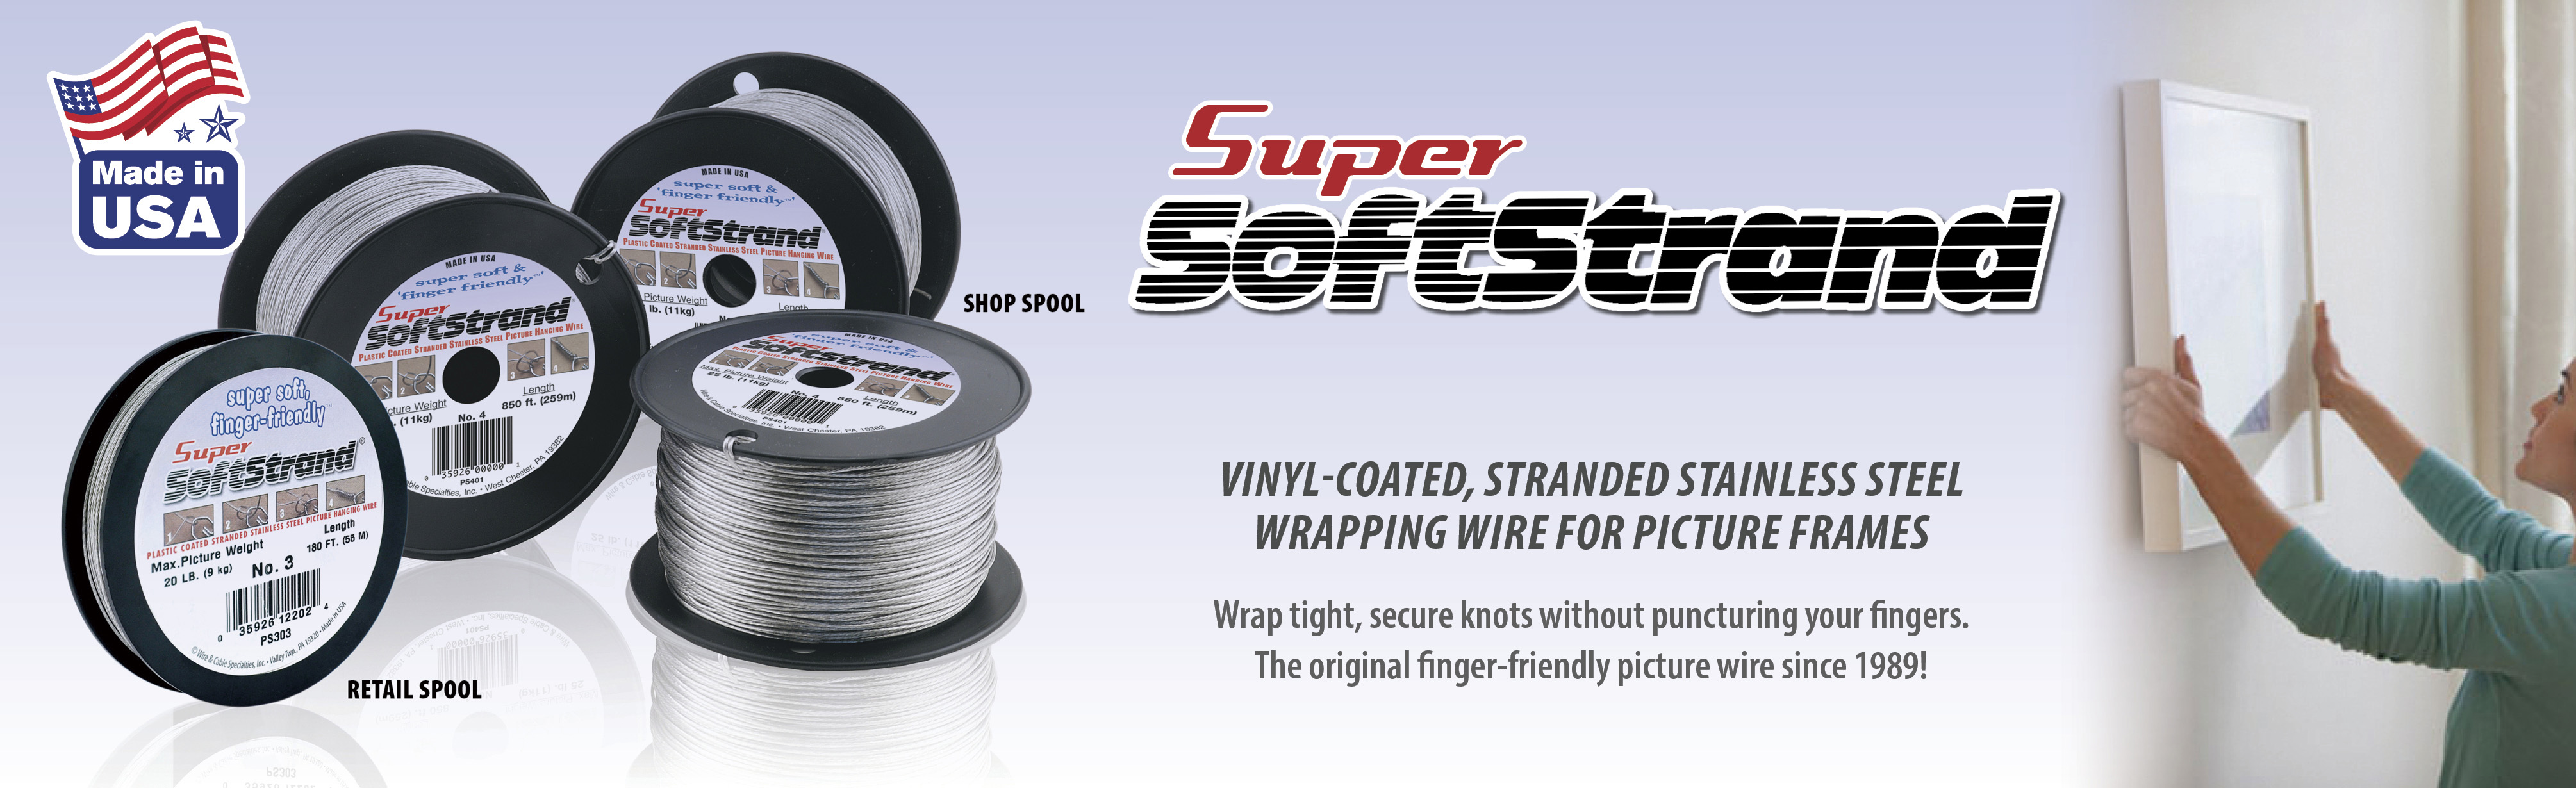 Super Softstrand, Vinyl-Coated Stranded Stainless Steel Picture Wrapping  Wire, Size #4, 25 lb / 11 kg, 850 ft / 259 m